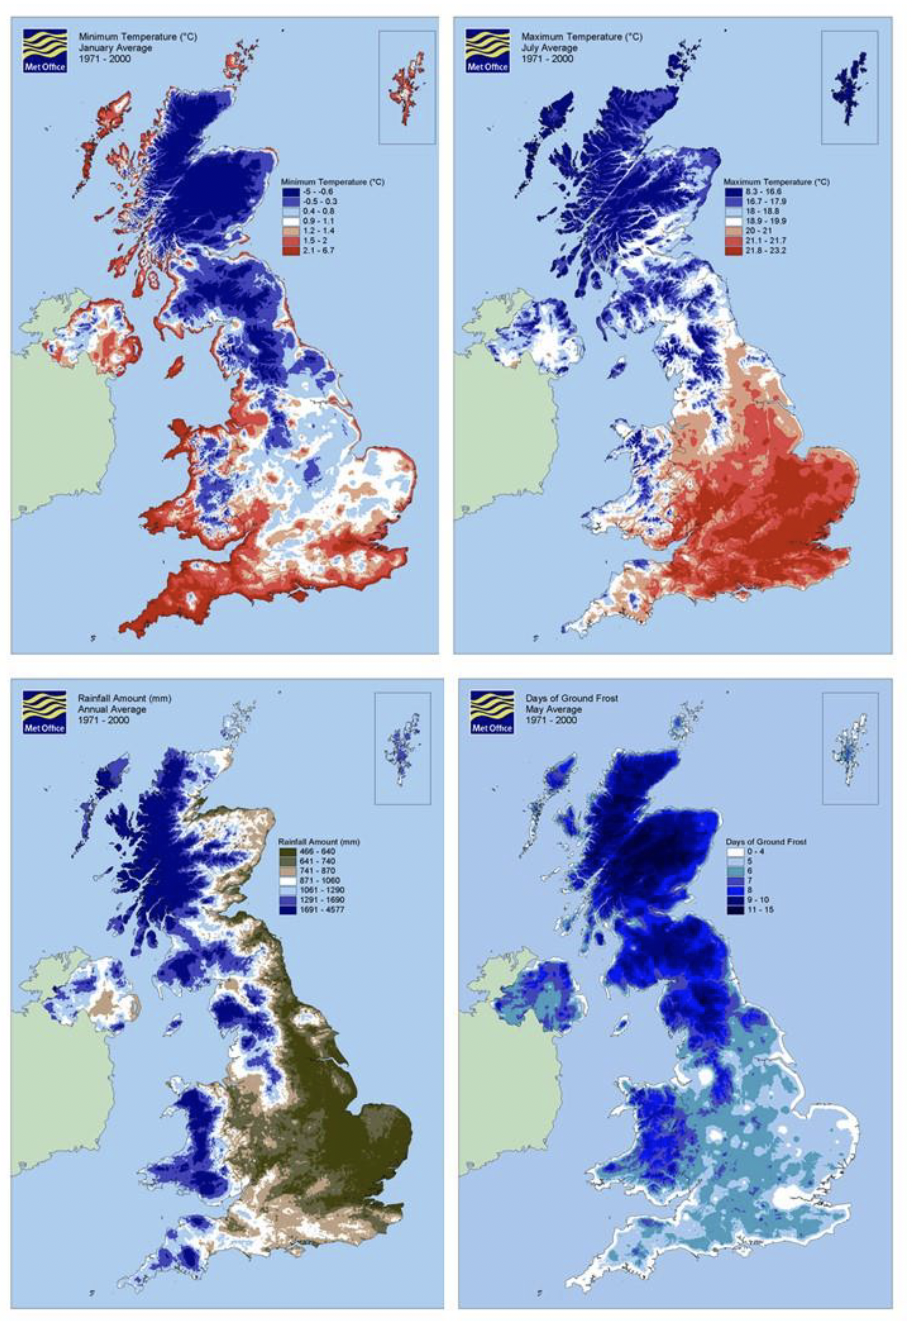 Four maps showing average climate variables for the UK for the years 1971 to 2000. 
The first map shows average minimum temperatures across the UK during January. For Scotland these range between -5 and -0.6 degrees centigrade for the bulk of central inland areas, between -0.5 and 0.3 degrees centigrade for peripheral inland areas, between 0.4 and 1.1 degrees centigrade in many coastal areas particularly on the east coast and between 1.2 and 6.7 degrees centigrade in other coastal areas particularly along the west coast. 
The second map shows the average maximum temperatures during July. 
For Scotland these range between 8.3 and 17.9 degrees centigrade for the bulk of the Highlands and Islands as well as much of southern Scotland below the central belt, while across much of the central belt, these range from 18 to 19.9 degrees centigrade. 
The third map shows average annual rainfall. In much of the west of Scotland as well as around Angus and the western parts of the Scottish Borders this ranges between 1291 and 4577 millimetres, while in largely coastal regions of the east it is mainly between 465 and 870 millimetres. 
The fourth map shows the average number of days of ground frost during May. In most of Scotland’s coastal extremes this ranges between 0 and 5 days, in lower lying areas further inland it is 7 to 8 days and in more mountainous inland areas it ranges from 9 to 15 days. 
The maps show that the climate in southern regions of Scotland is broadly comparable to the climate of northern England meaning climate is unlikely to prevent the establishment of species already present in northern England, though it may limit the spread of INNS within Scotland.
